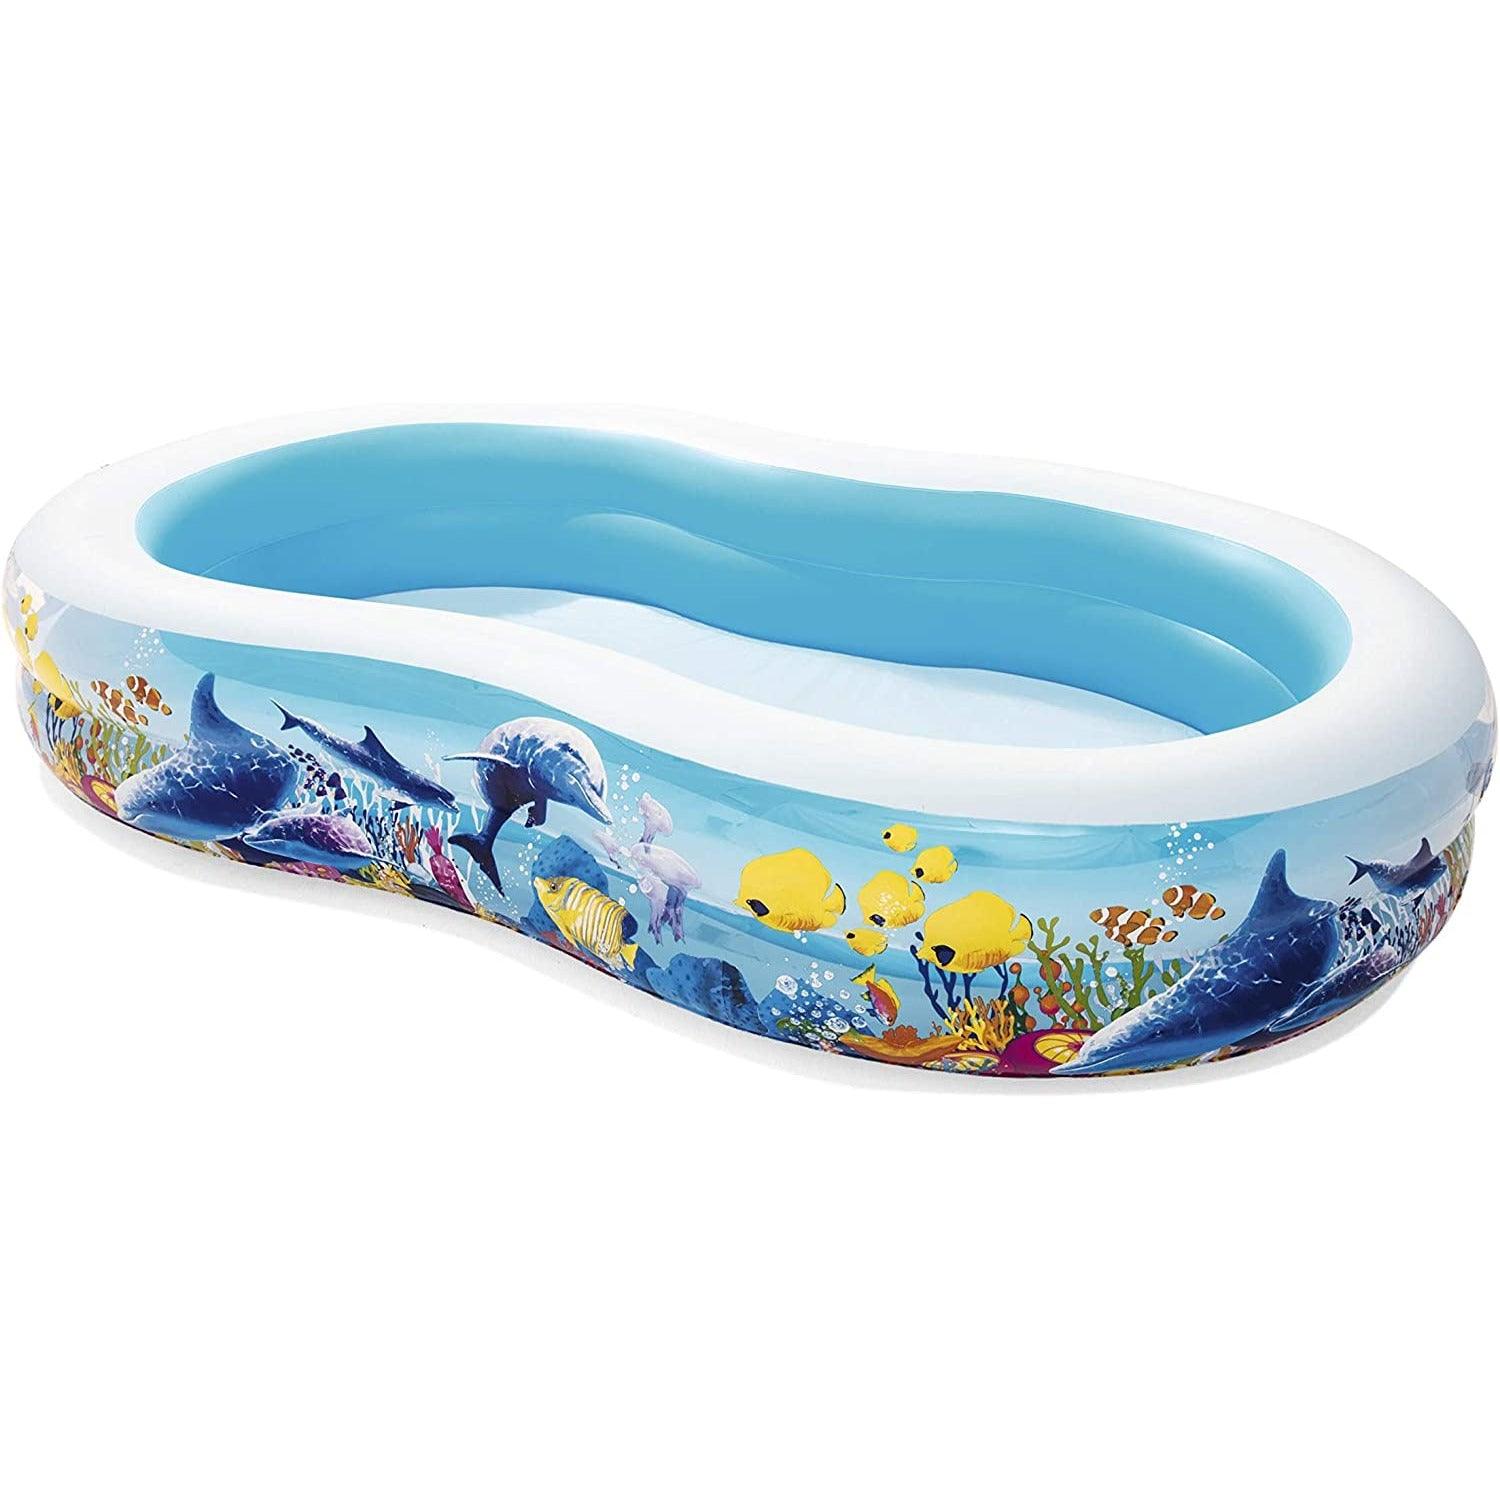 Bestway 54118 Sea Creatures-Printed Inflatable Swimming Pool - BumbleToys - 5-7 Years, 8-13 Years, Bestway, Boys, Floaters, Girls, Sand Toys Pools & Inflatables